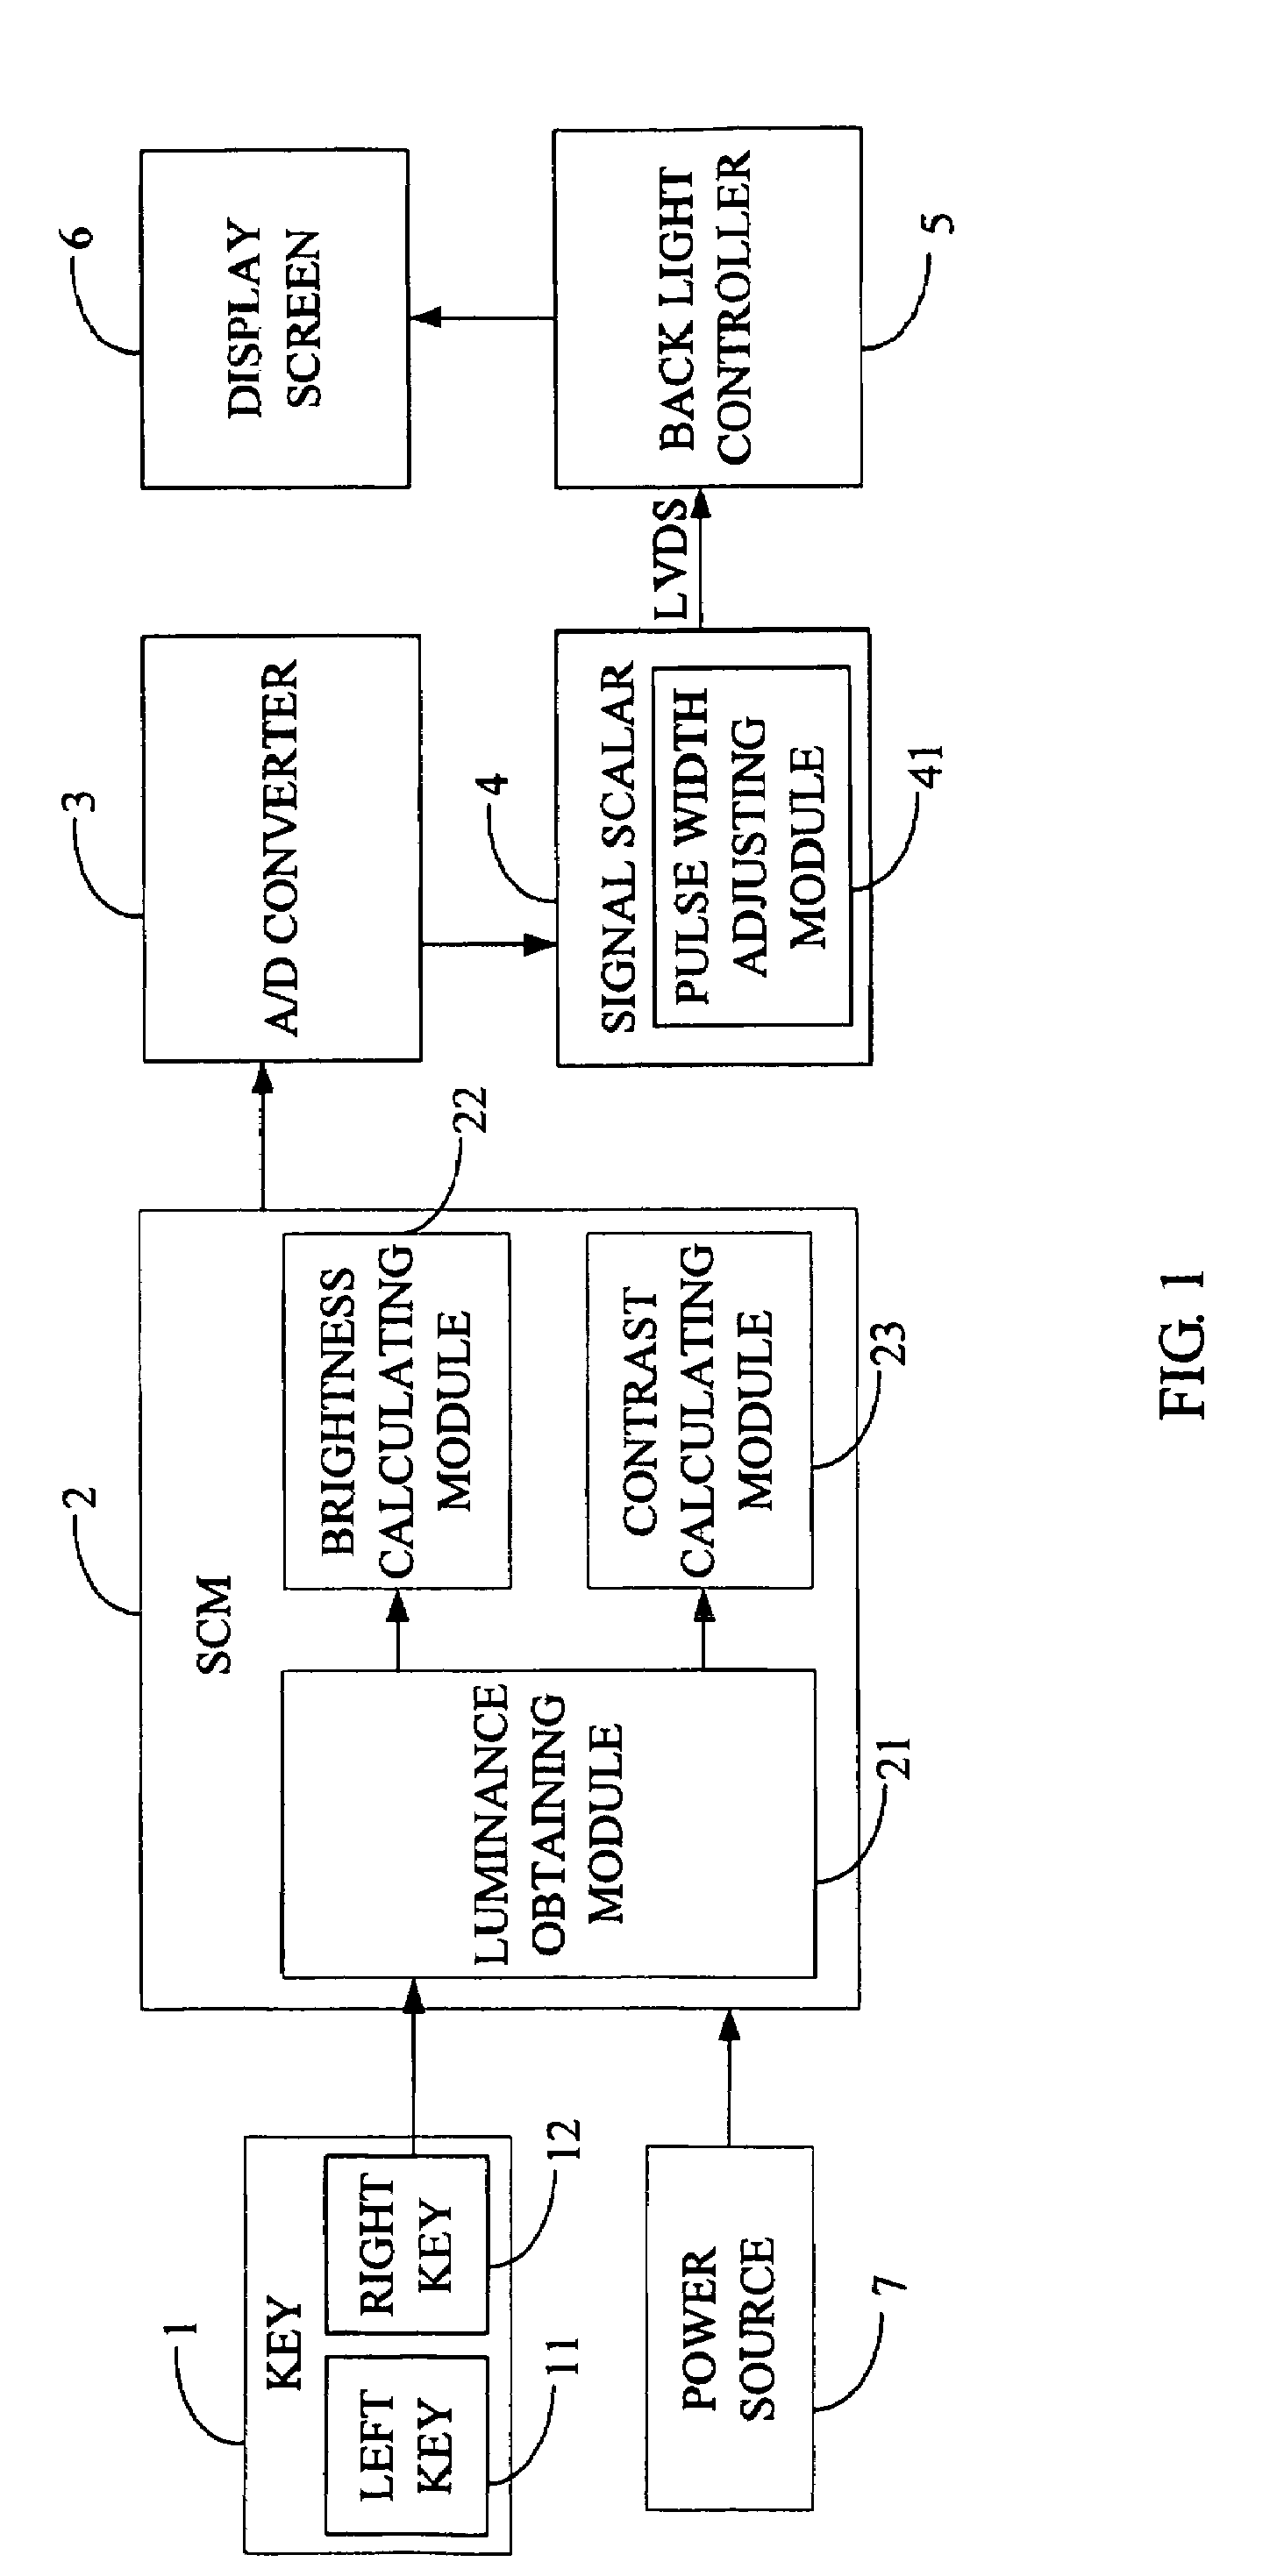 Method for simultaneously adjusting brightness and contrast of a display